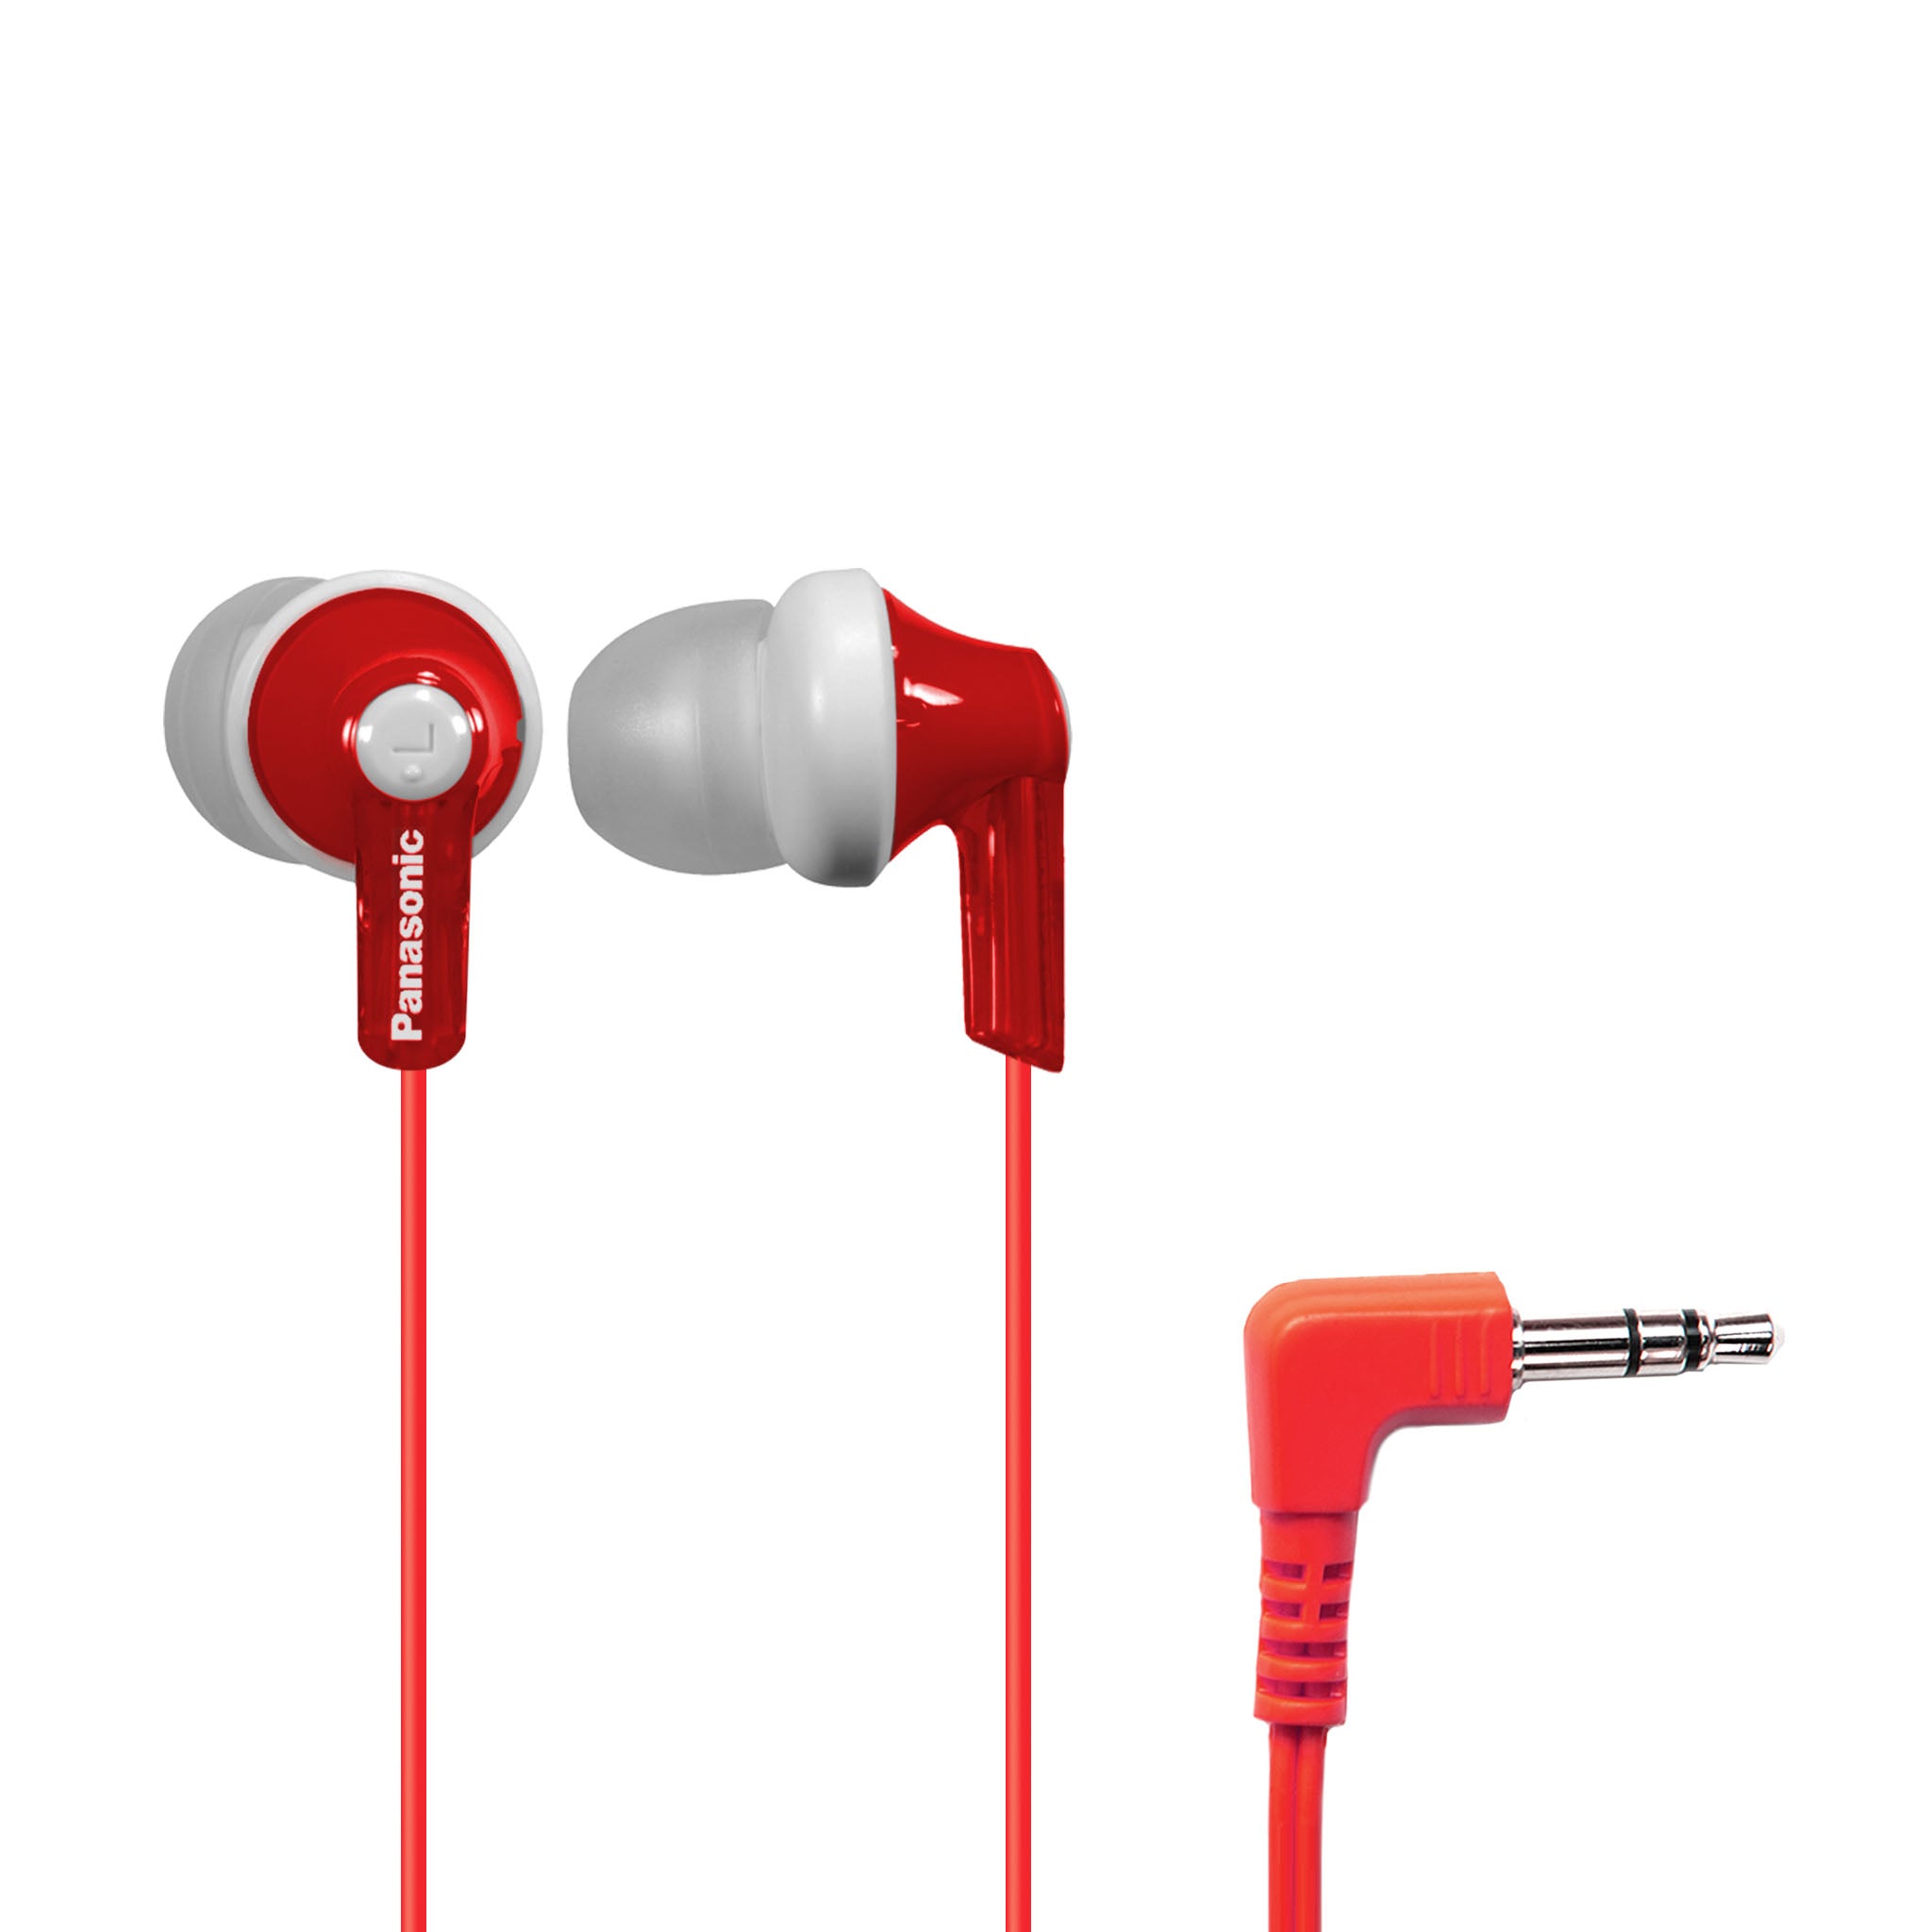 Panasonic ErgoFit for Jack Phones - RP-HJE120 with Laptops In-Ear Headphones Earbud 3.5mm and